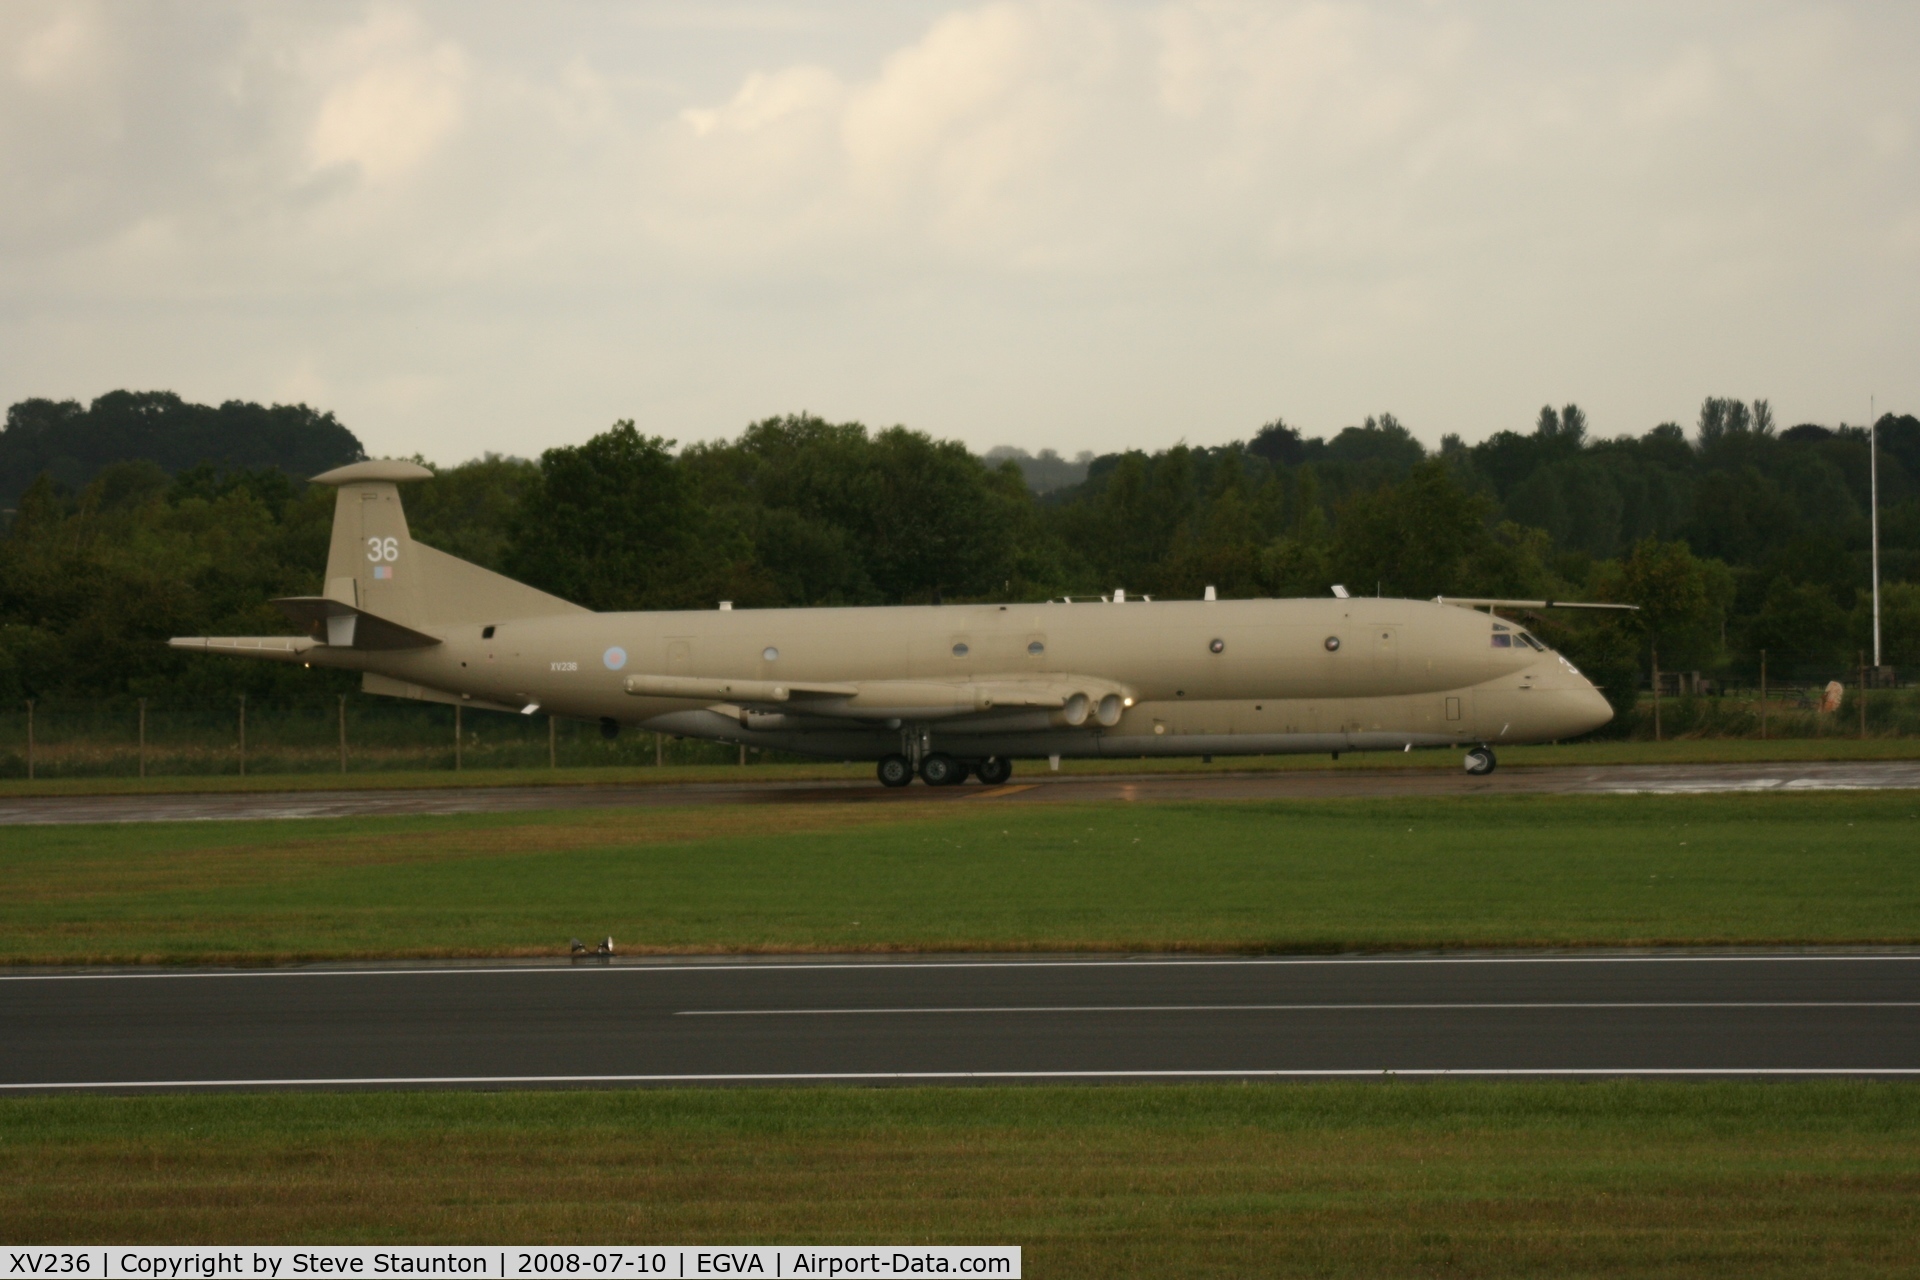 XV236, Hawker Siddeley Nimrod MR.2 C/N 8011, Taken at the Royal International Air Tattoo 2008 during arrivals and departures (show days cancelled due to bad weather)